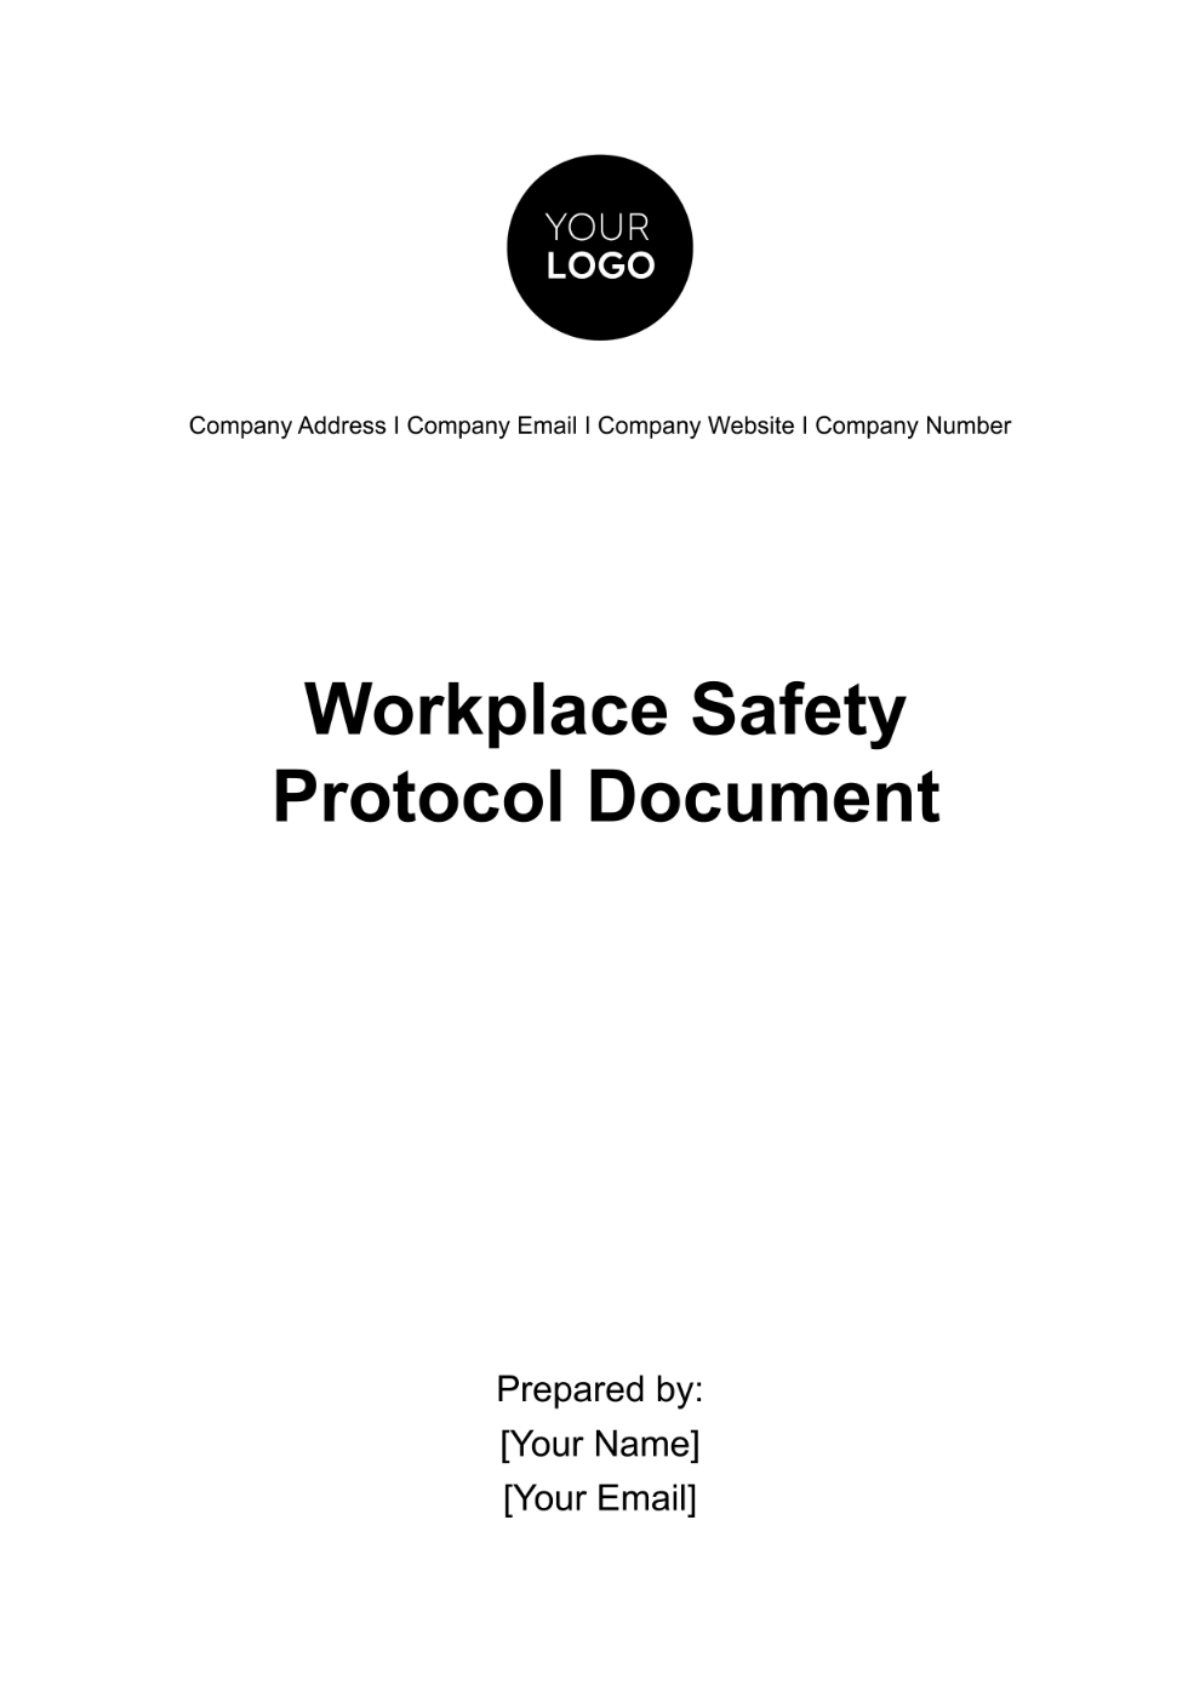 Free Workplace Safety Protocol Document Template